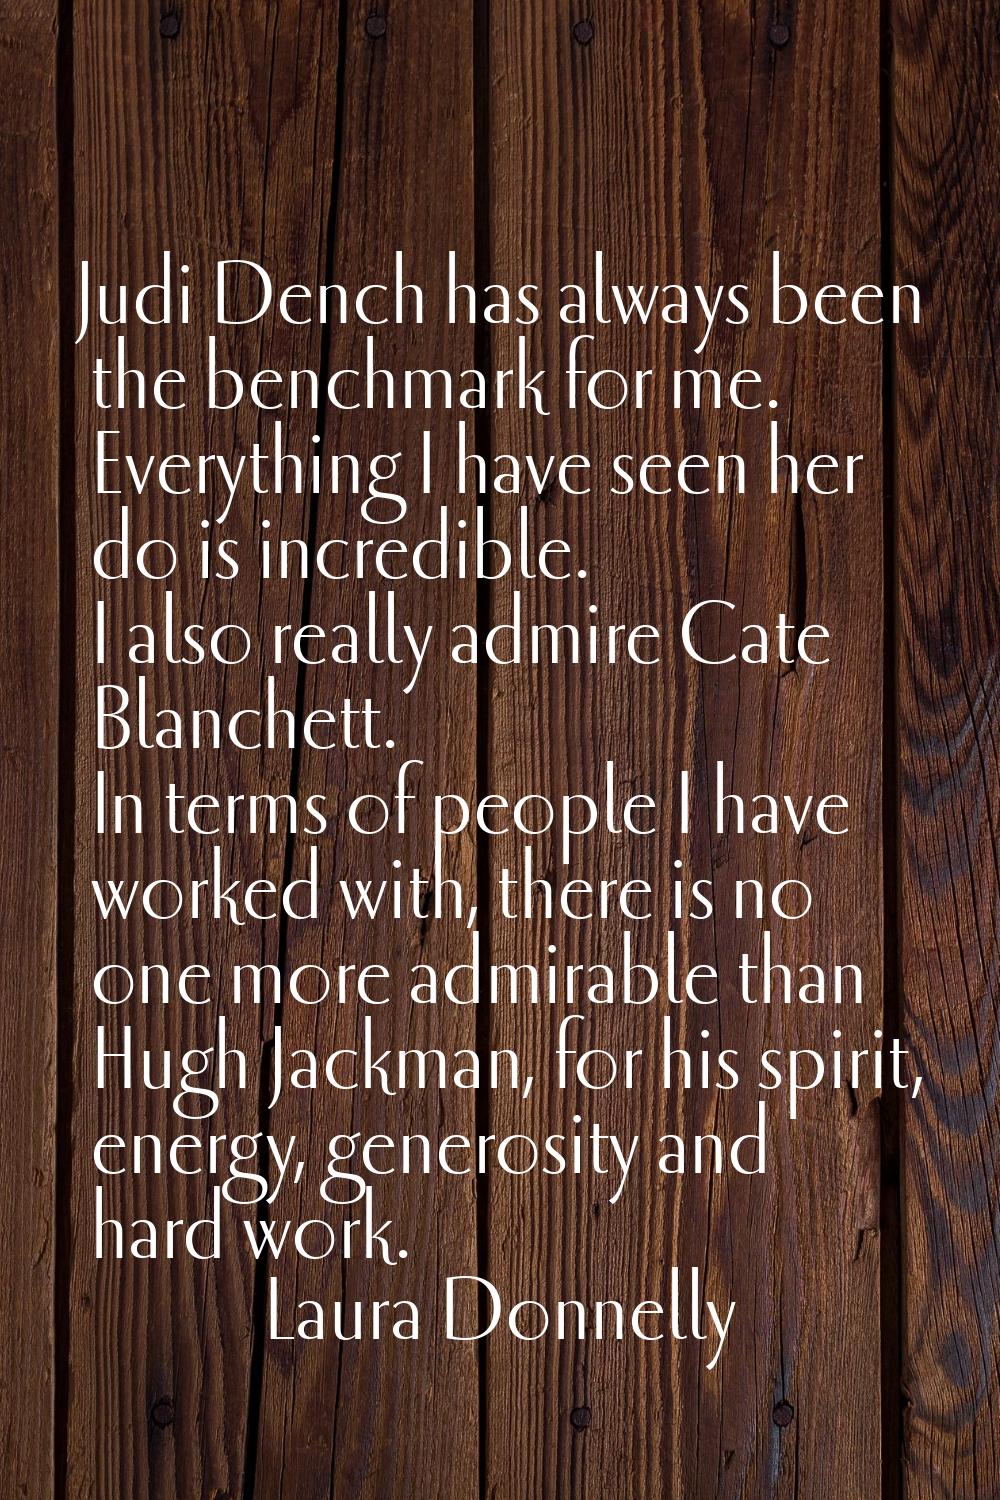 Judi Dench has always been the benchmark for me. Everything I have seen her do is incredible. I als